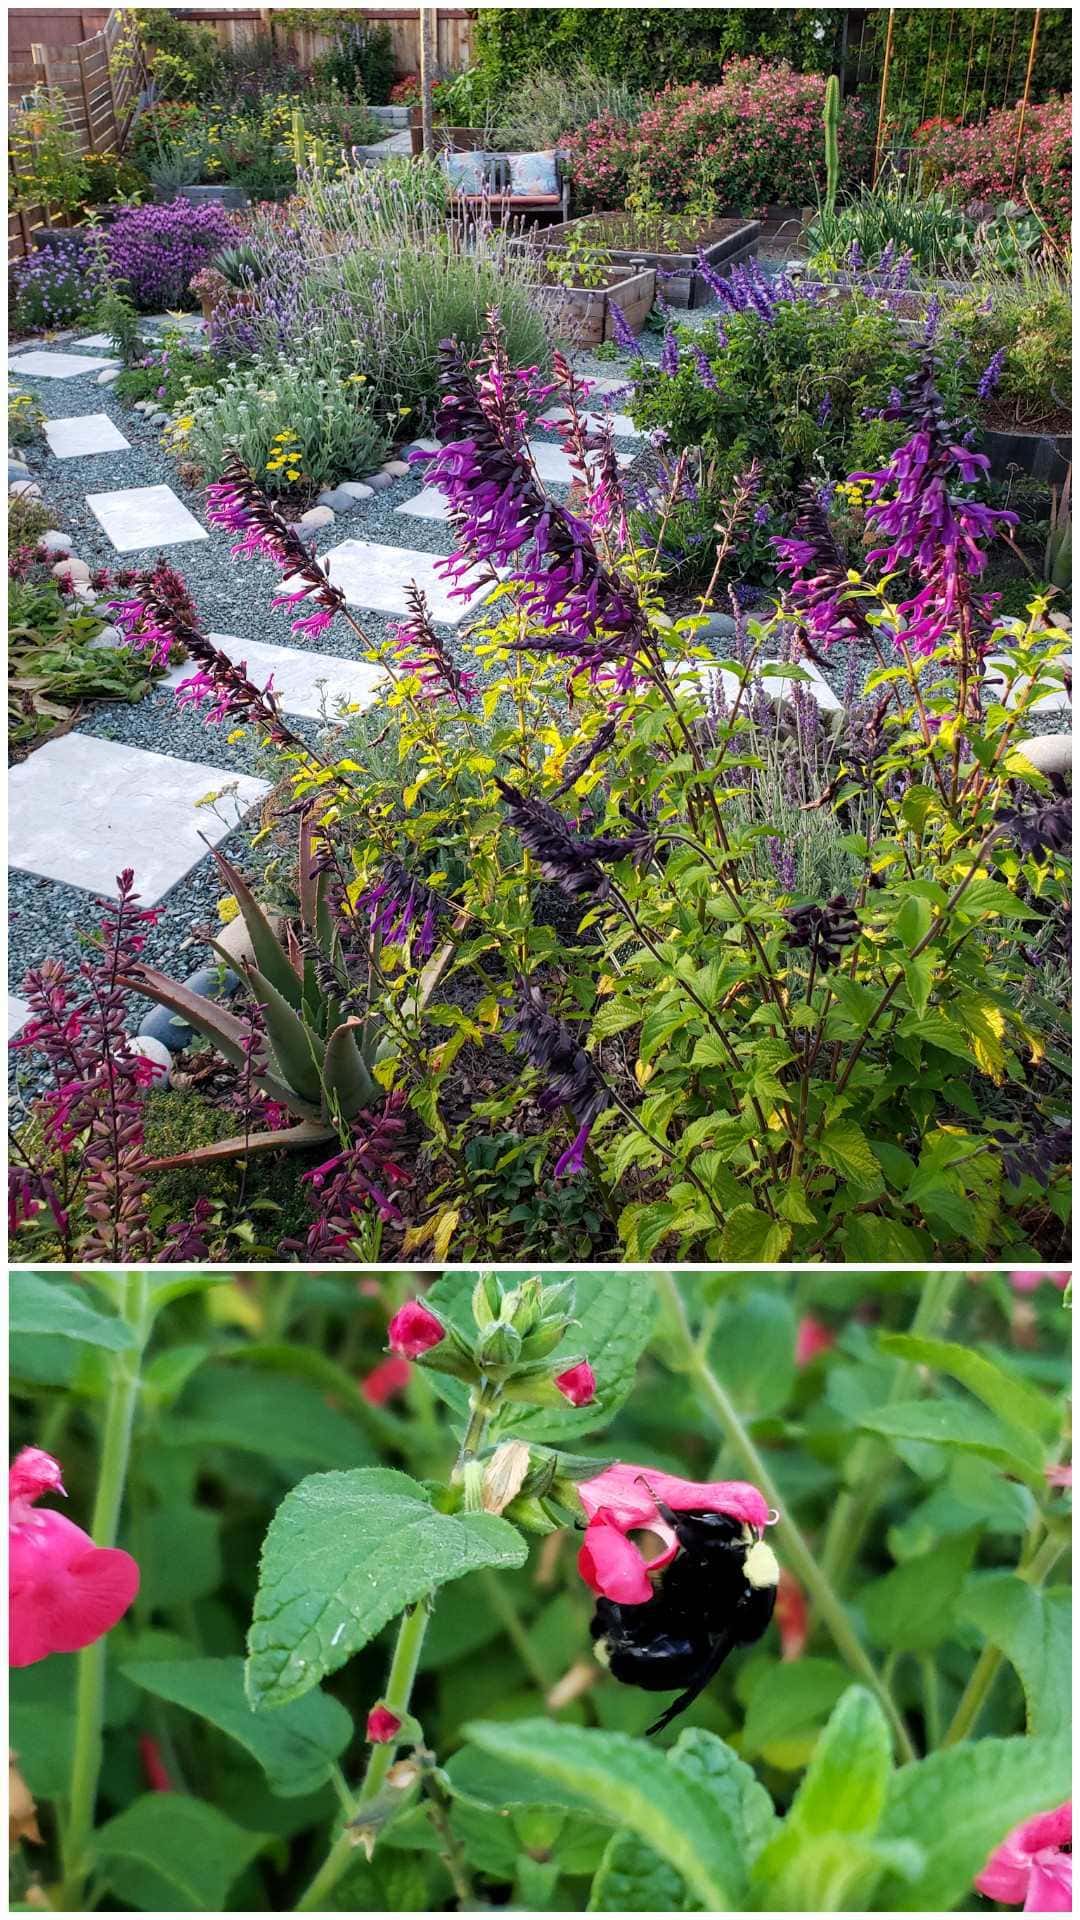 In the top image, a garden is full of purple, pink and yellow flowers of all shapes and sizes, lined by stone pathways. The bottom image shows a  close up of a fat black and yellow bumble bee enjoying a pink Watermelon Salvia bloom, with his face stuffed inside.